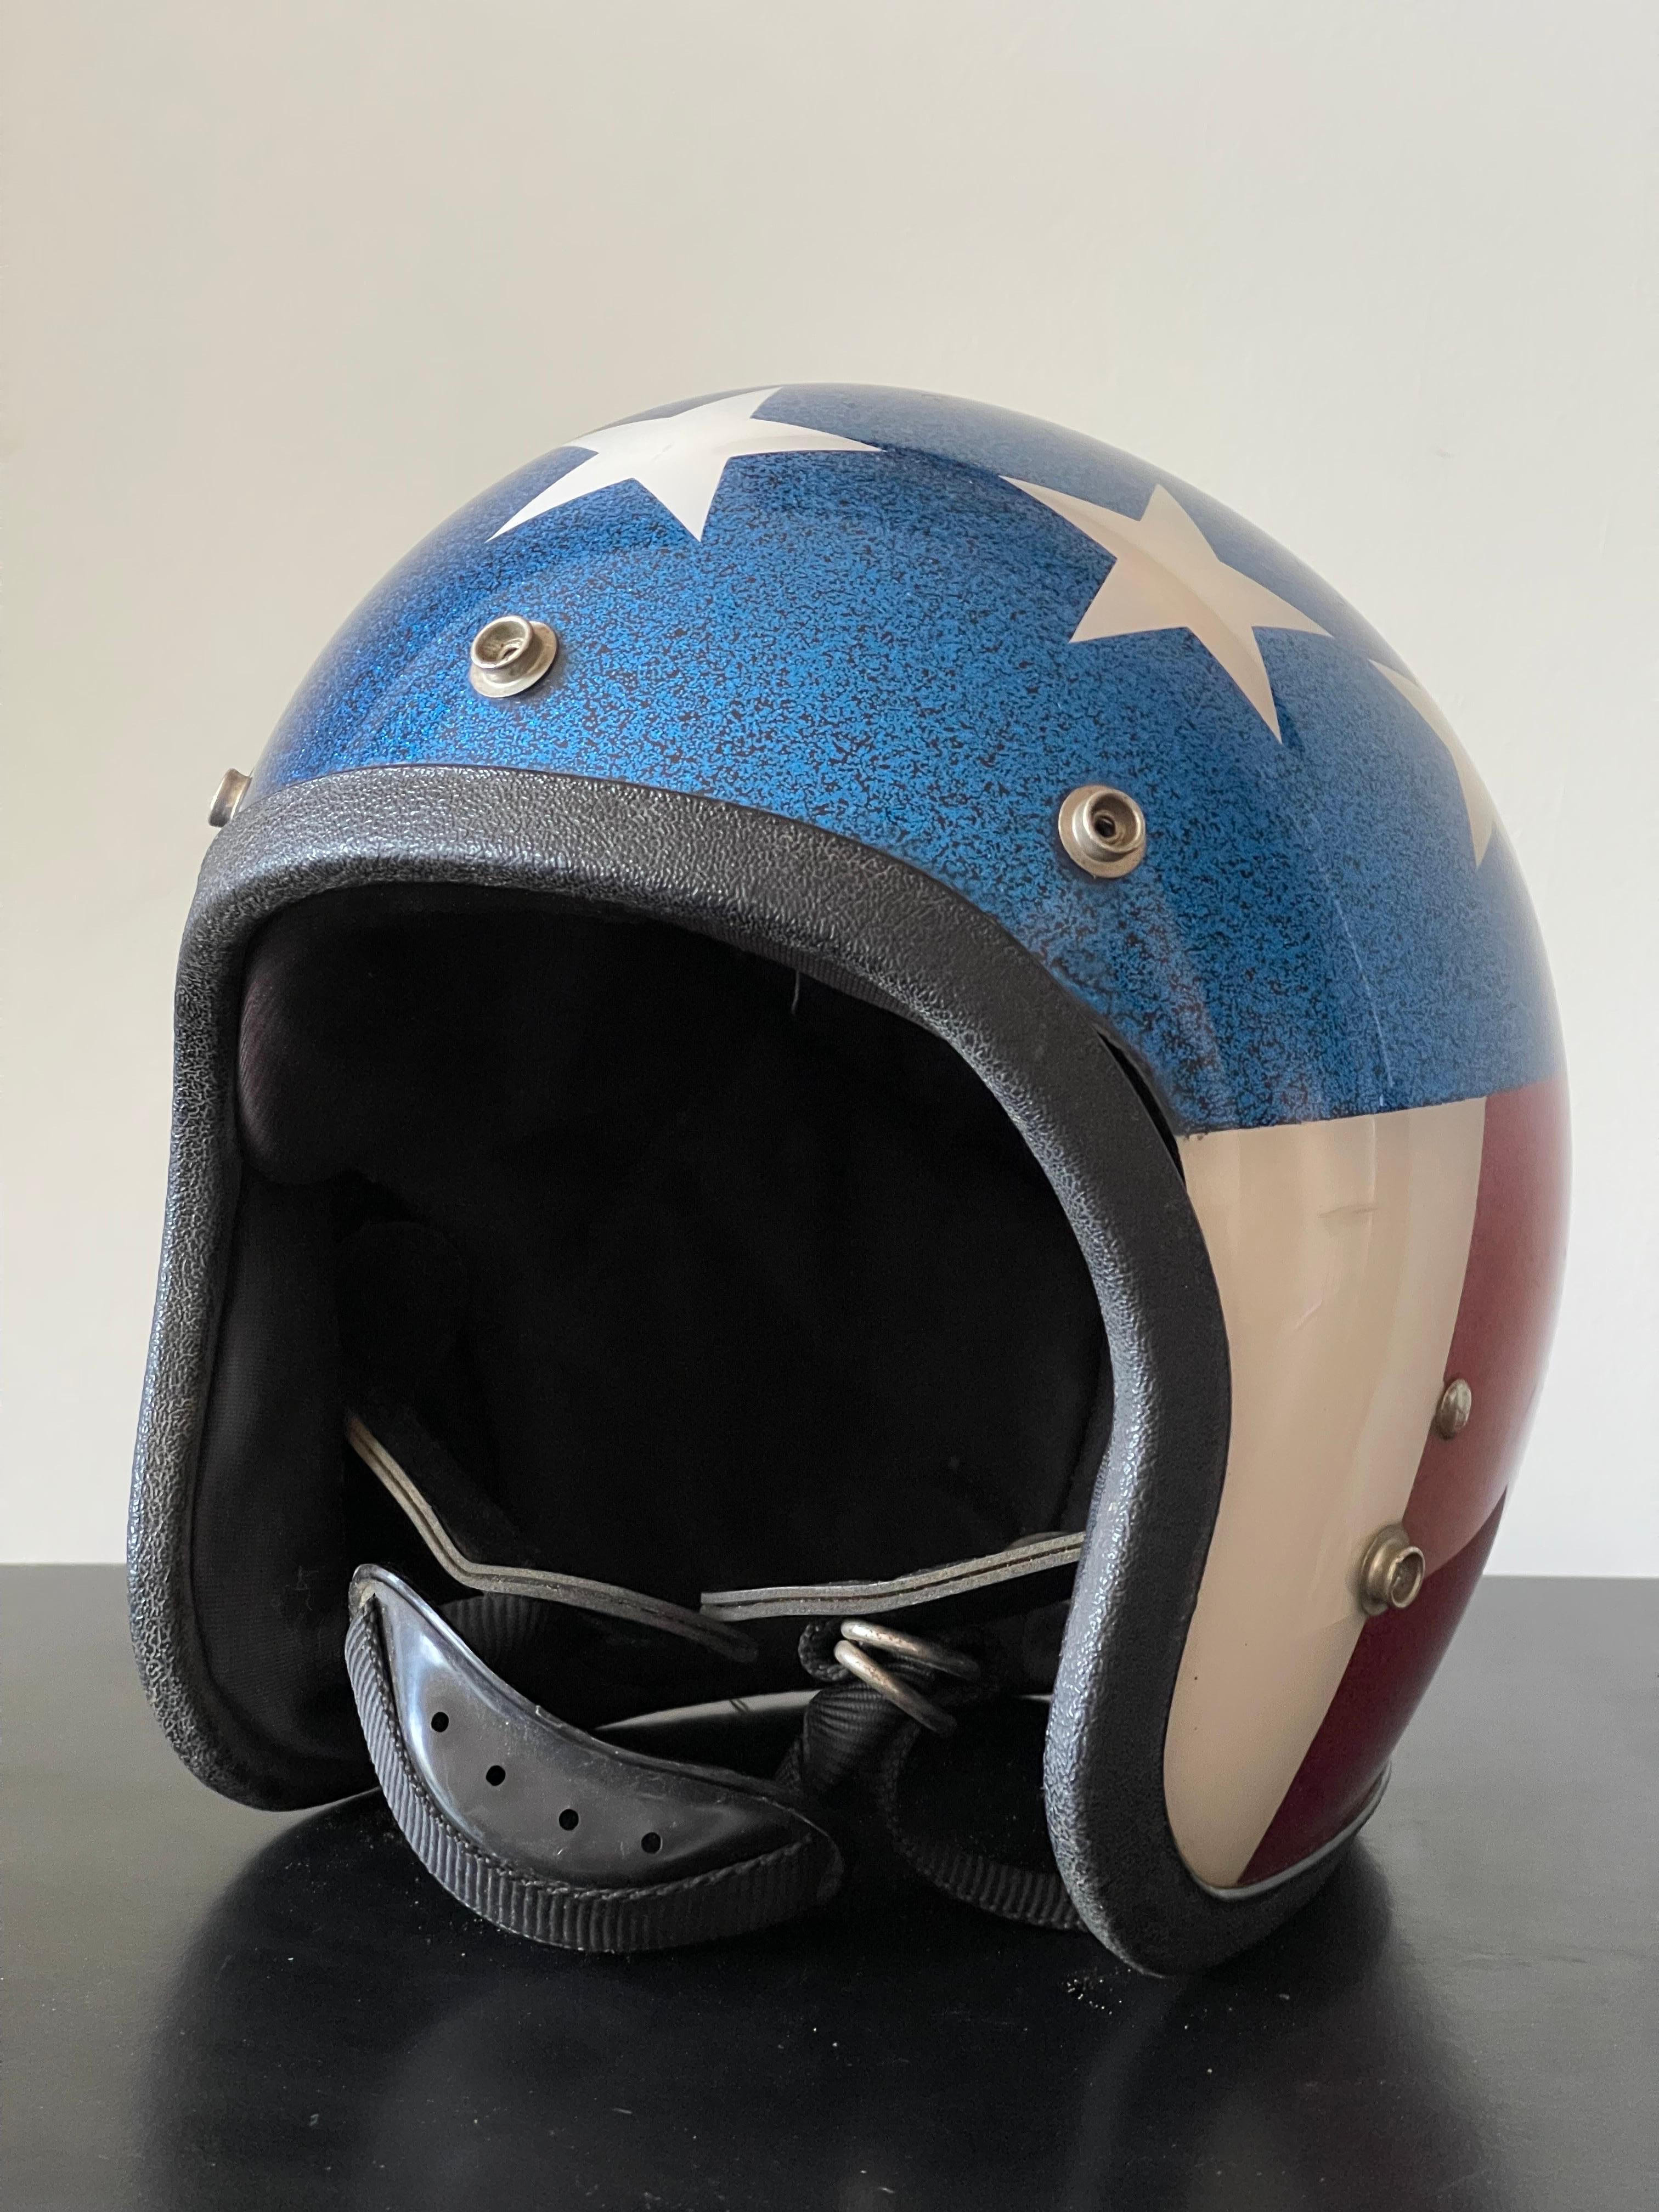 Very cool American Flag motorcycle helmet appears to have never been used. Original sticker still inside the helmet. Rare chinstrap with it, as they usually comer off. Very nice shelf decor. 
The inside foam is disintegrating (sign of never being